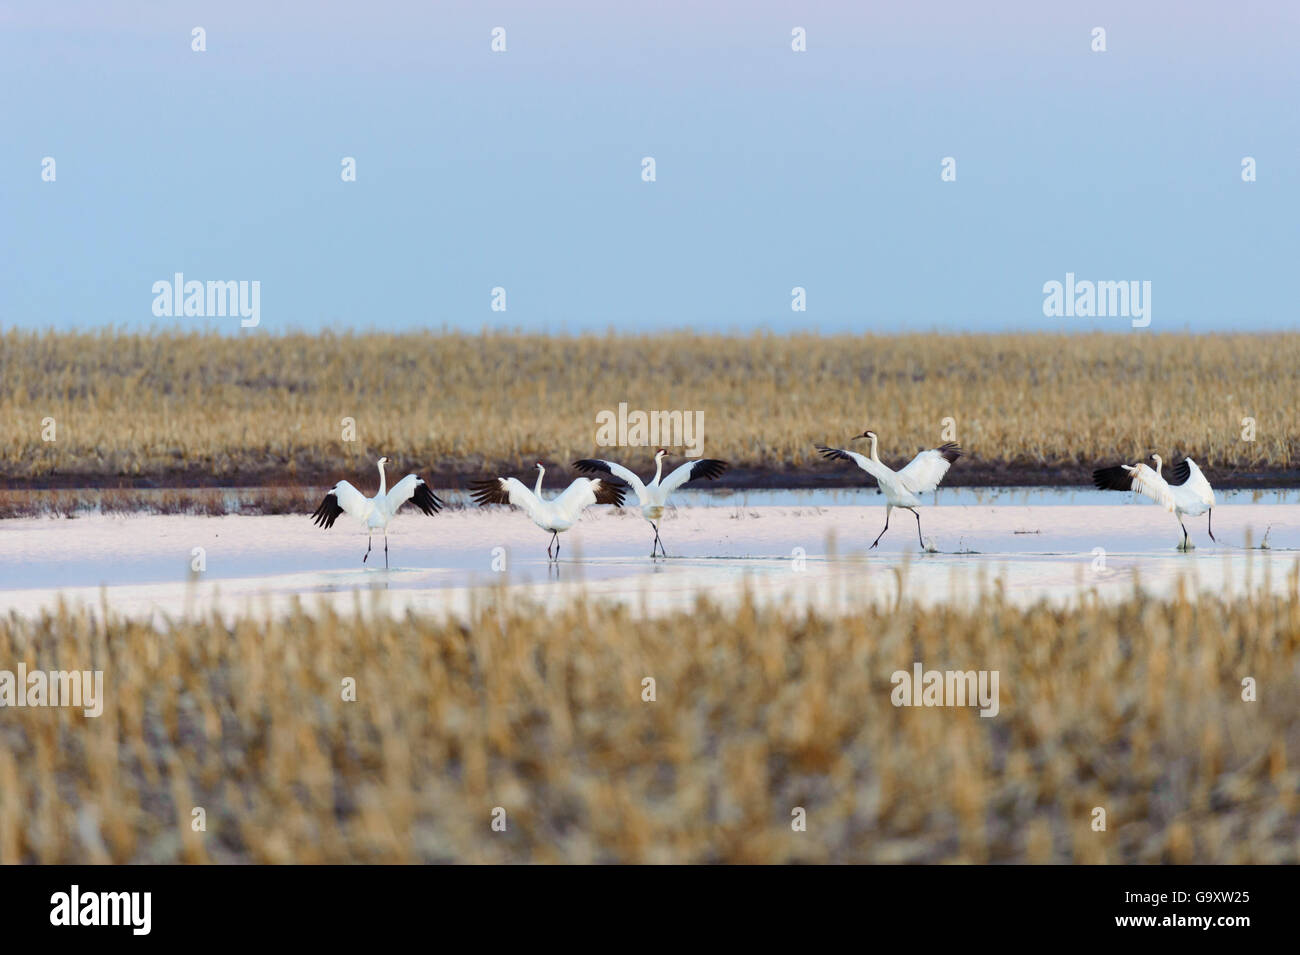 Whooping cranes (Grus americana) taking off during spring migration. Central South Dakota, USA. April. Stock Photo